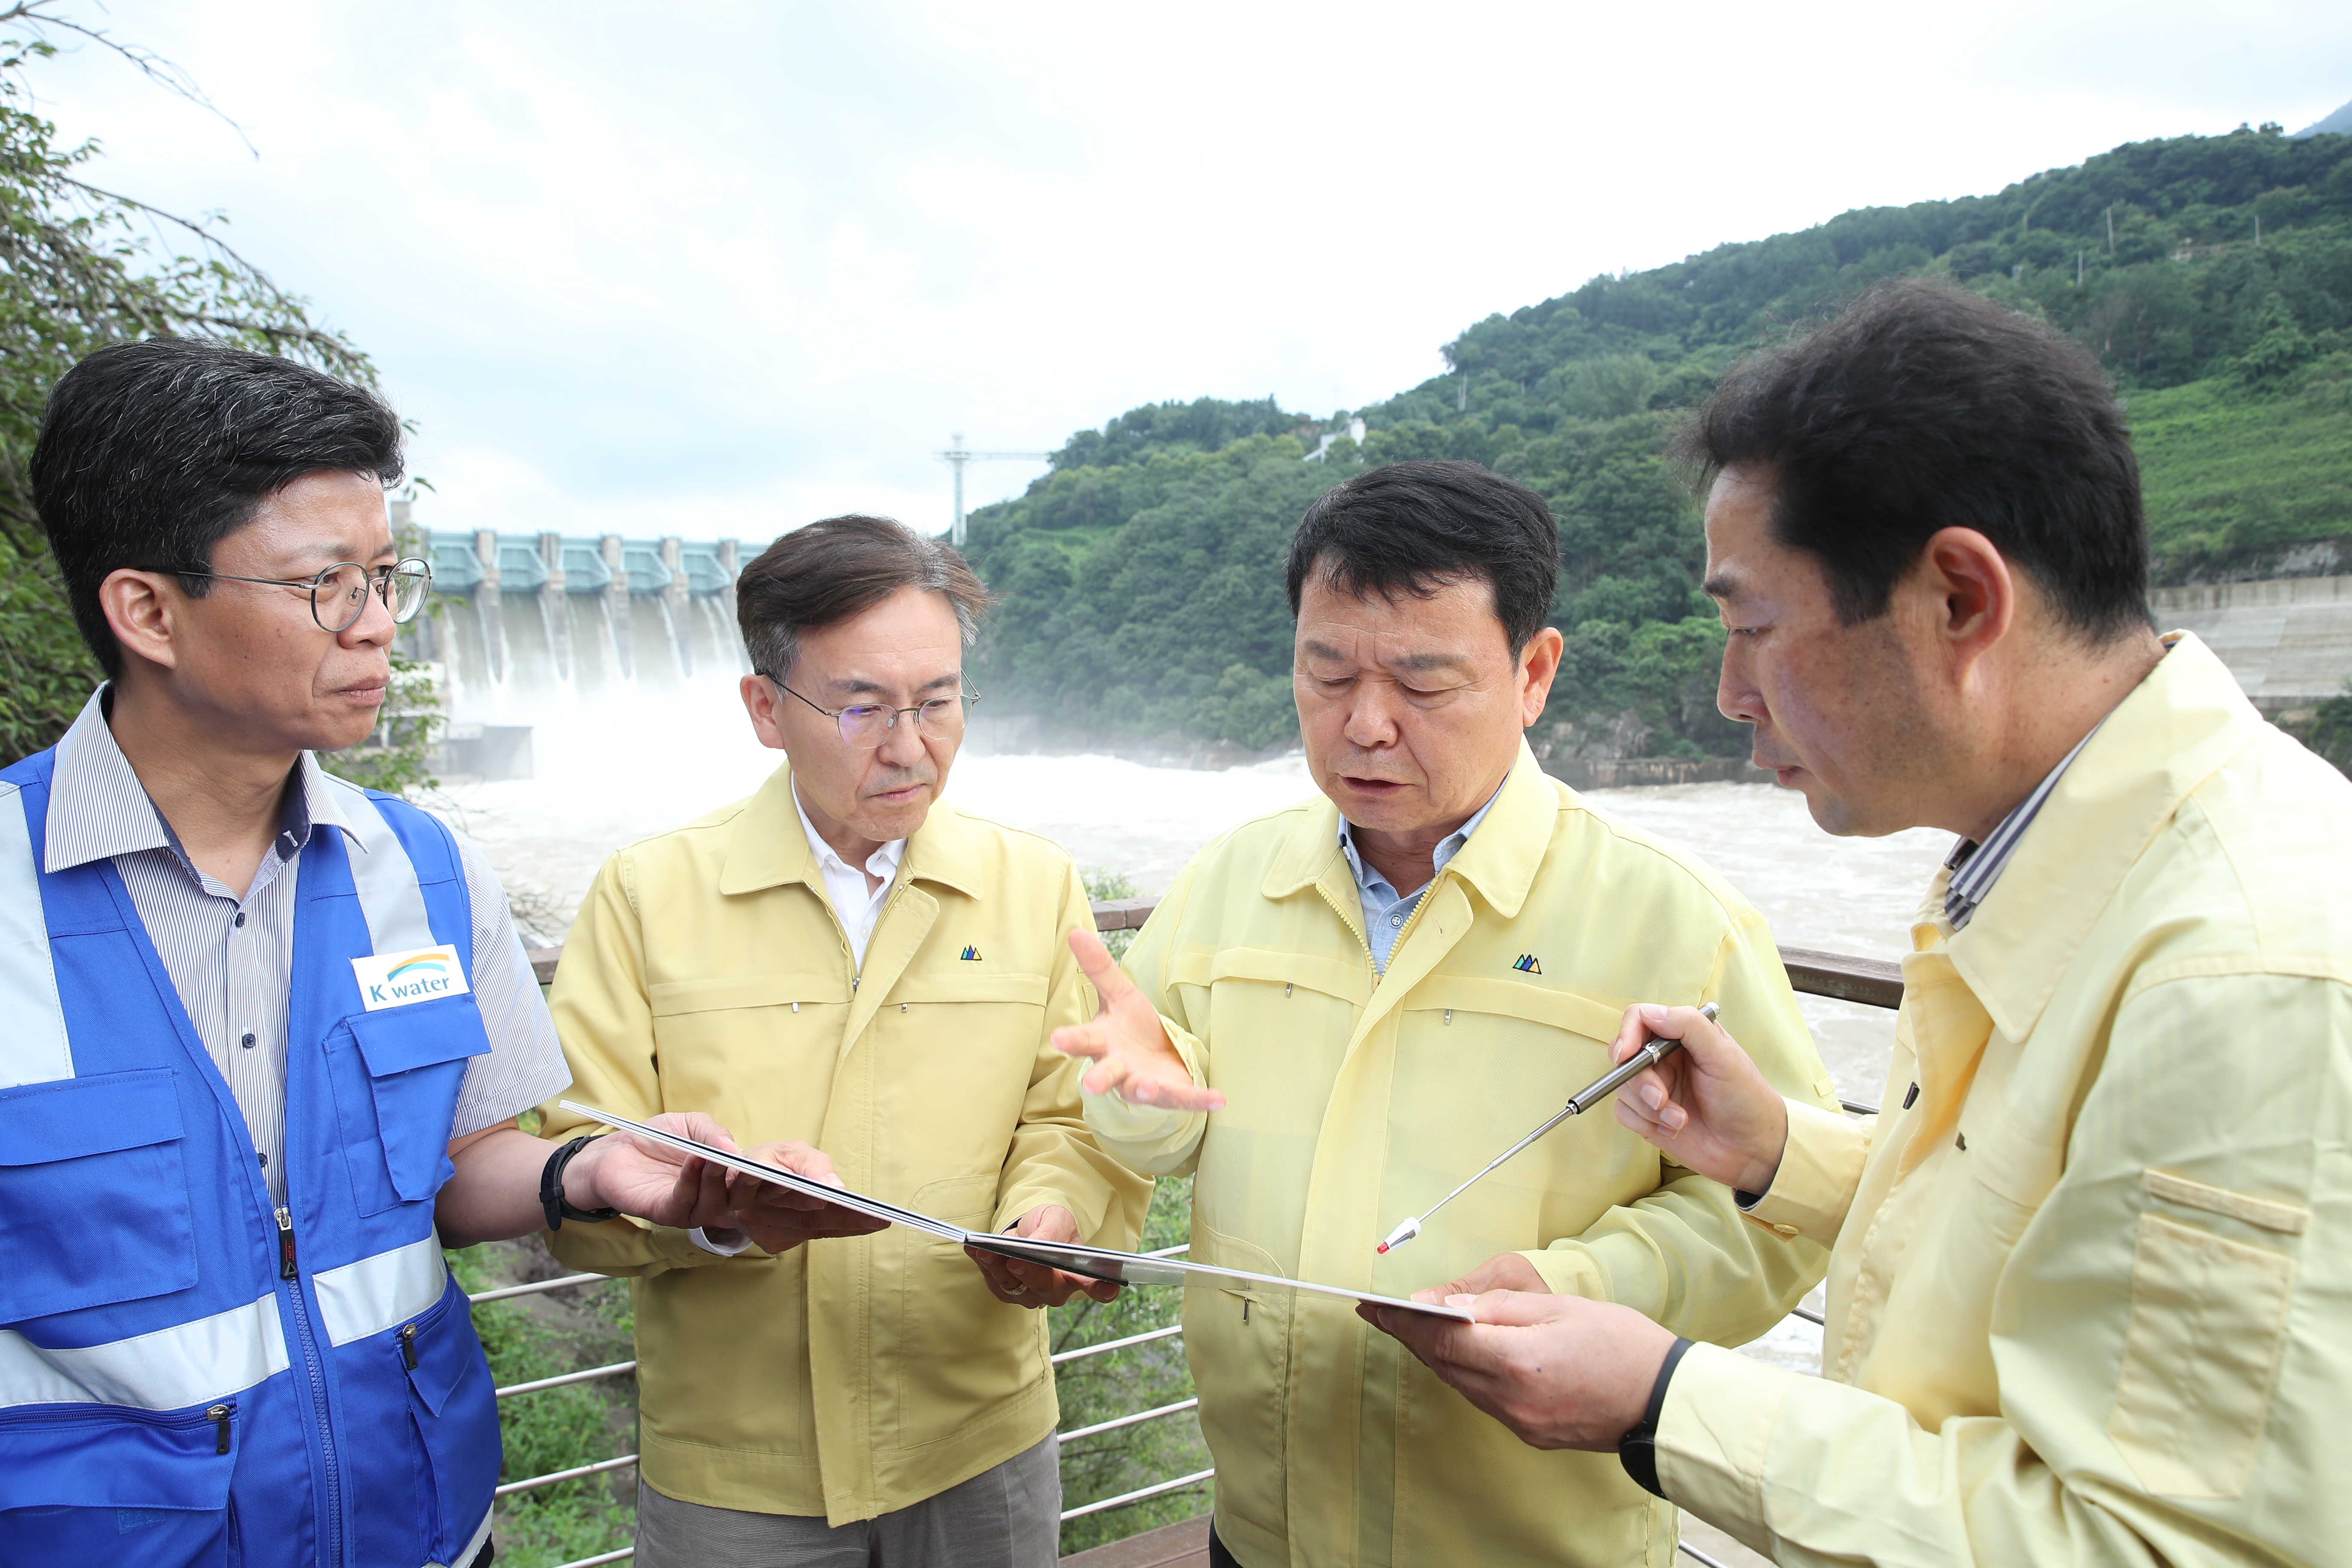 Inspection of Water Management Response Status at Chungju Dam